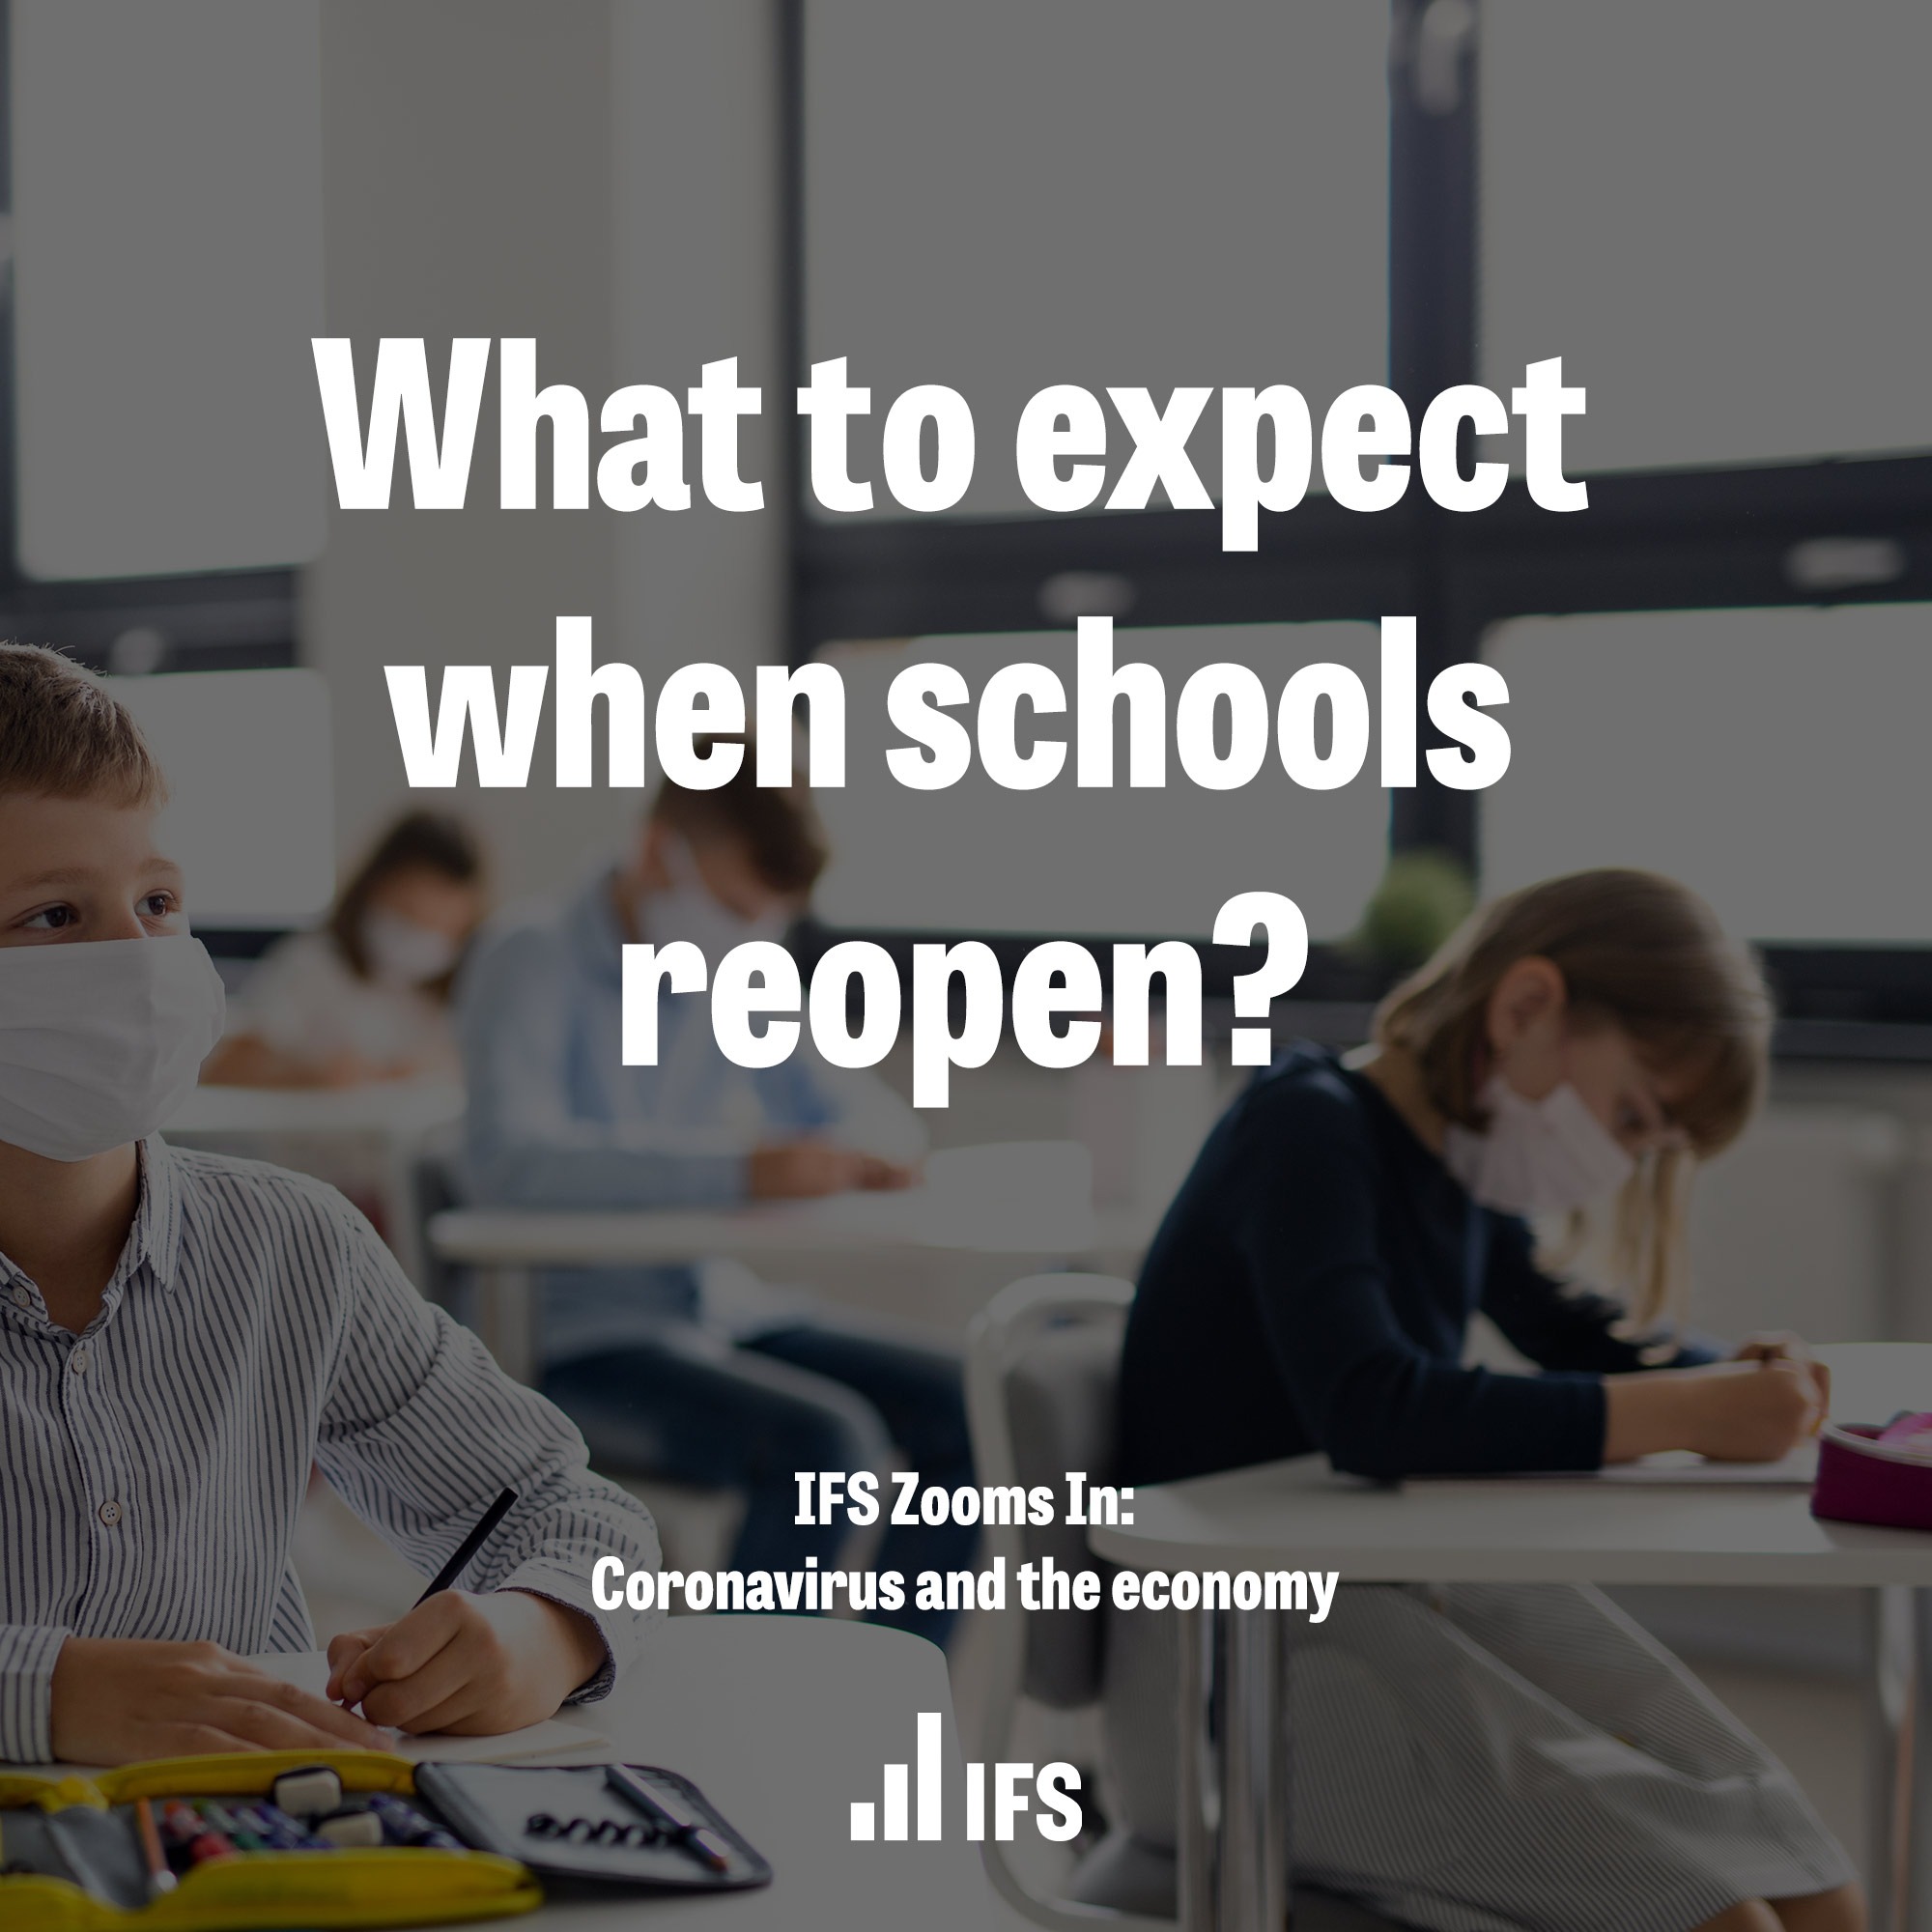 What to expect when schools reopen?